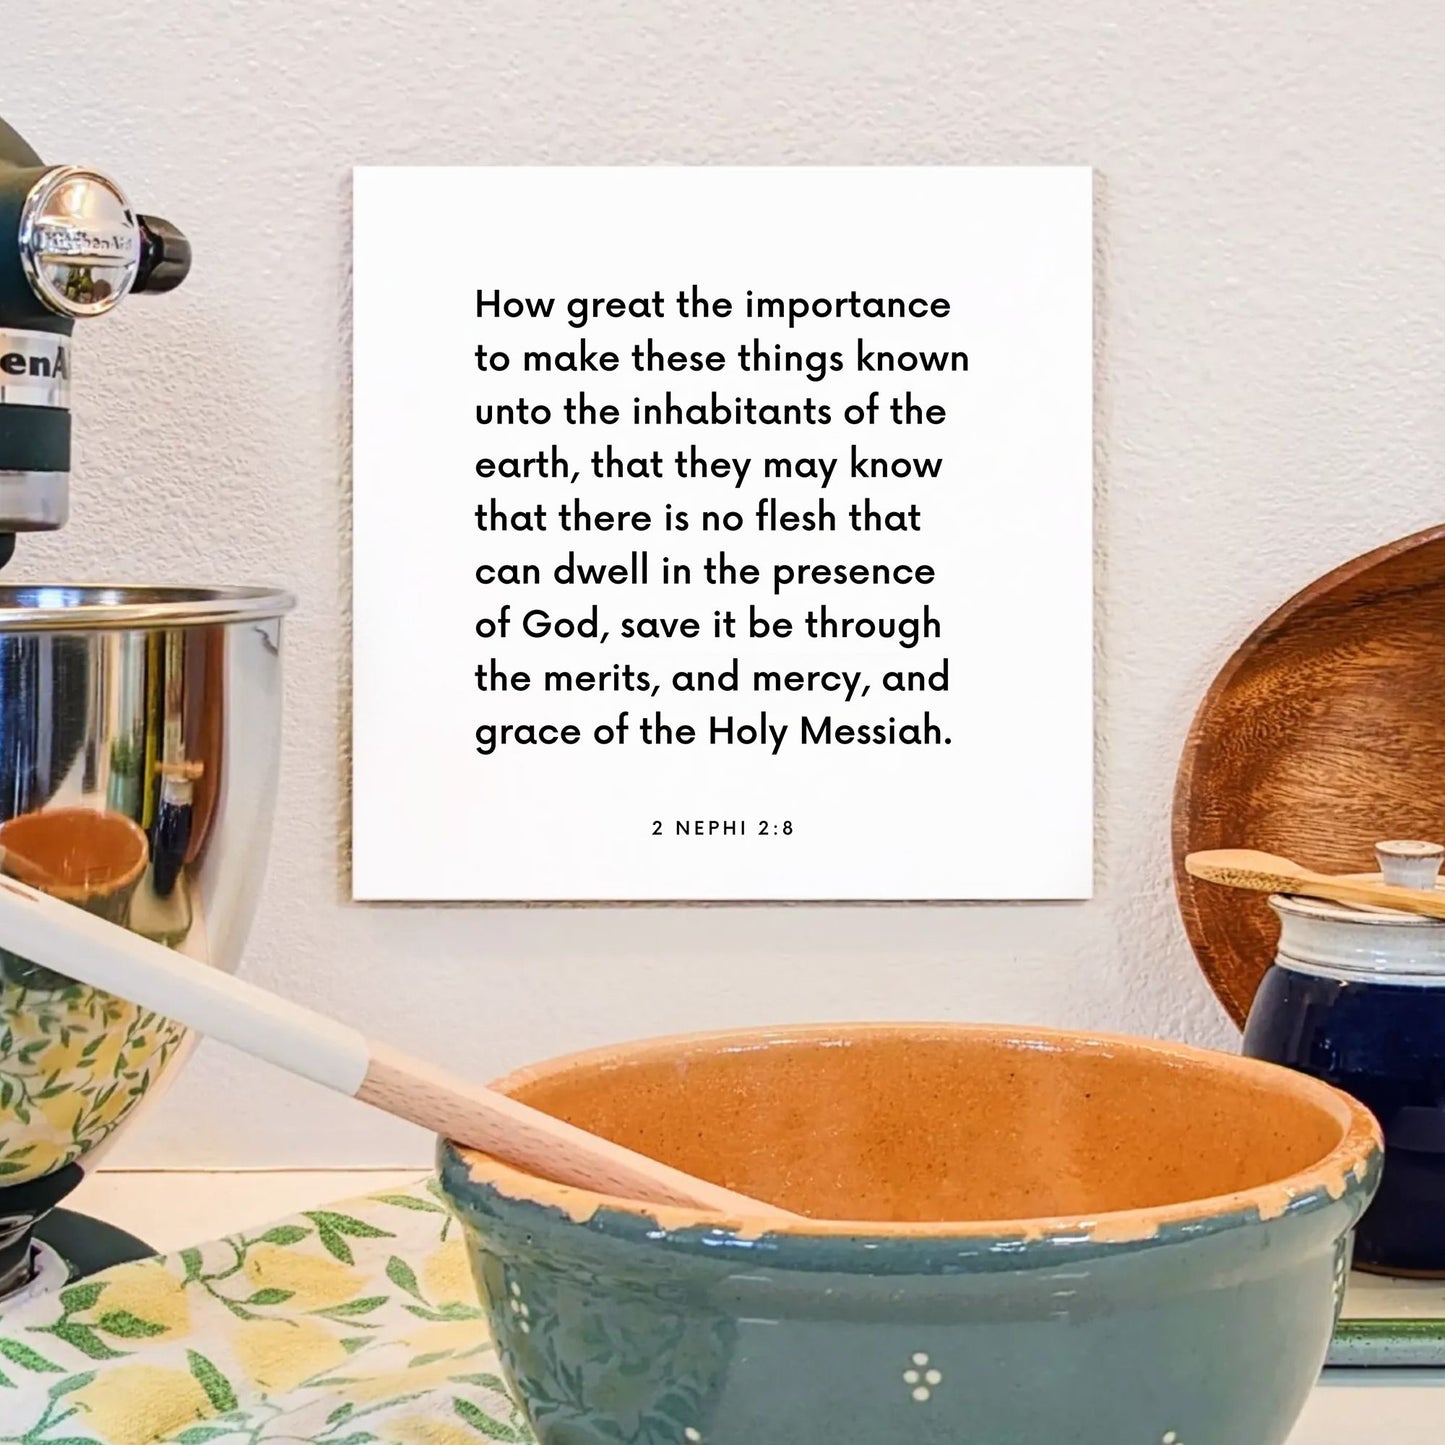 Kitchen mouting of the scripture tile for 2 Nephi 2:8 - "How great the importance to make these things known"